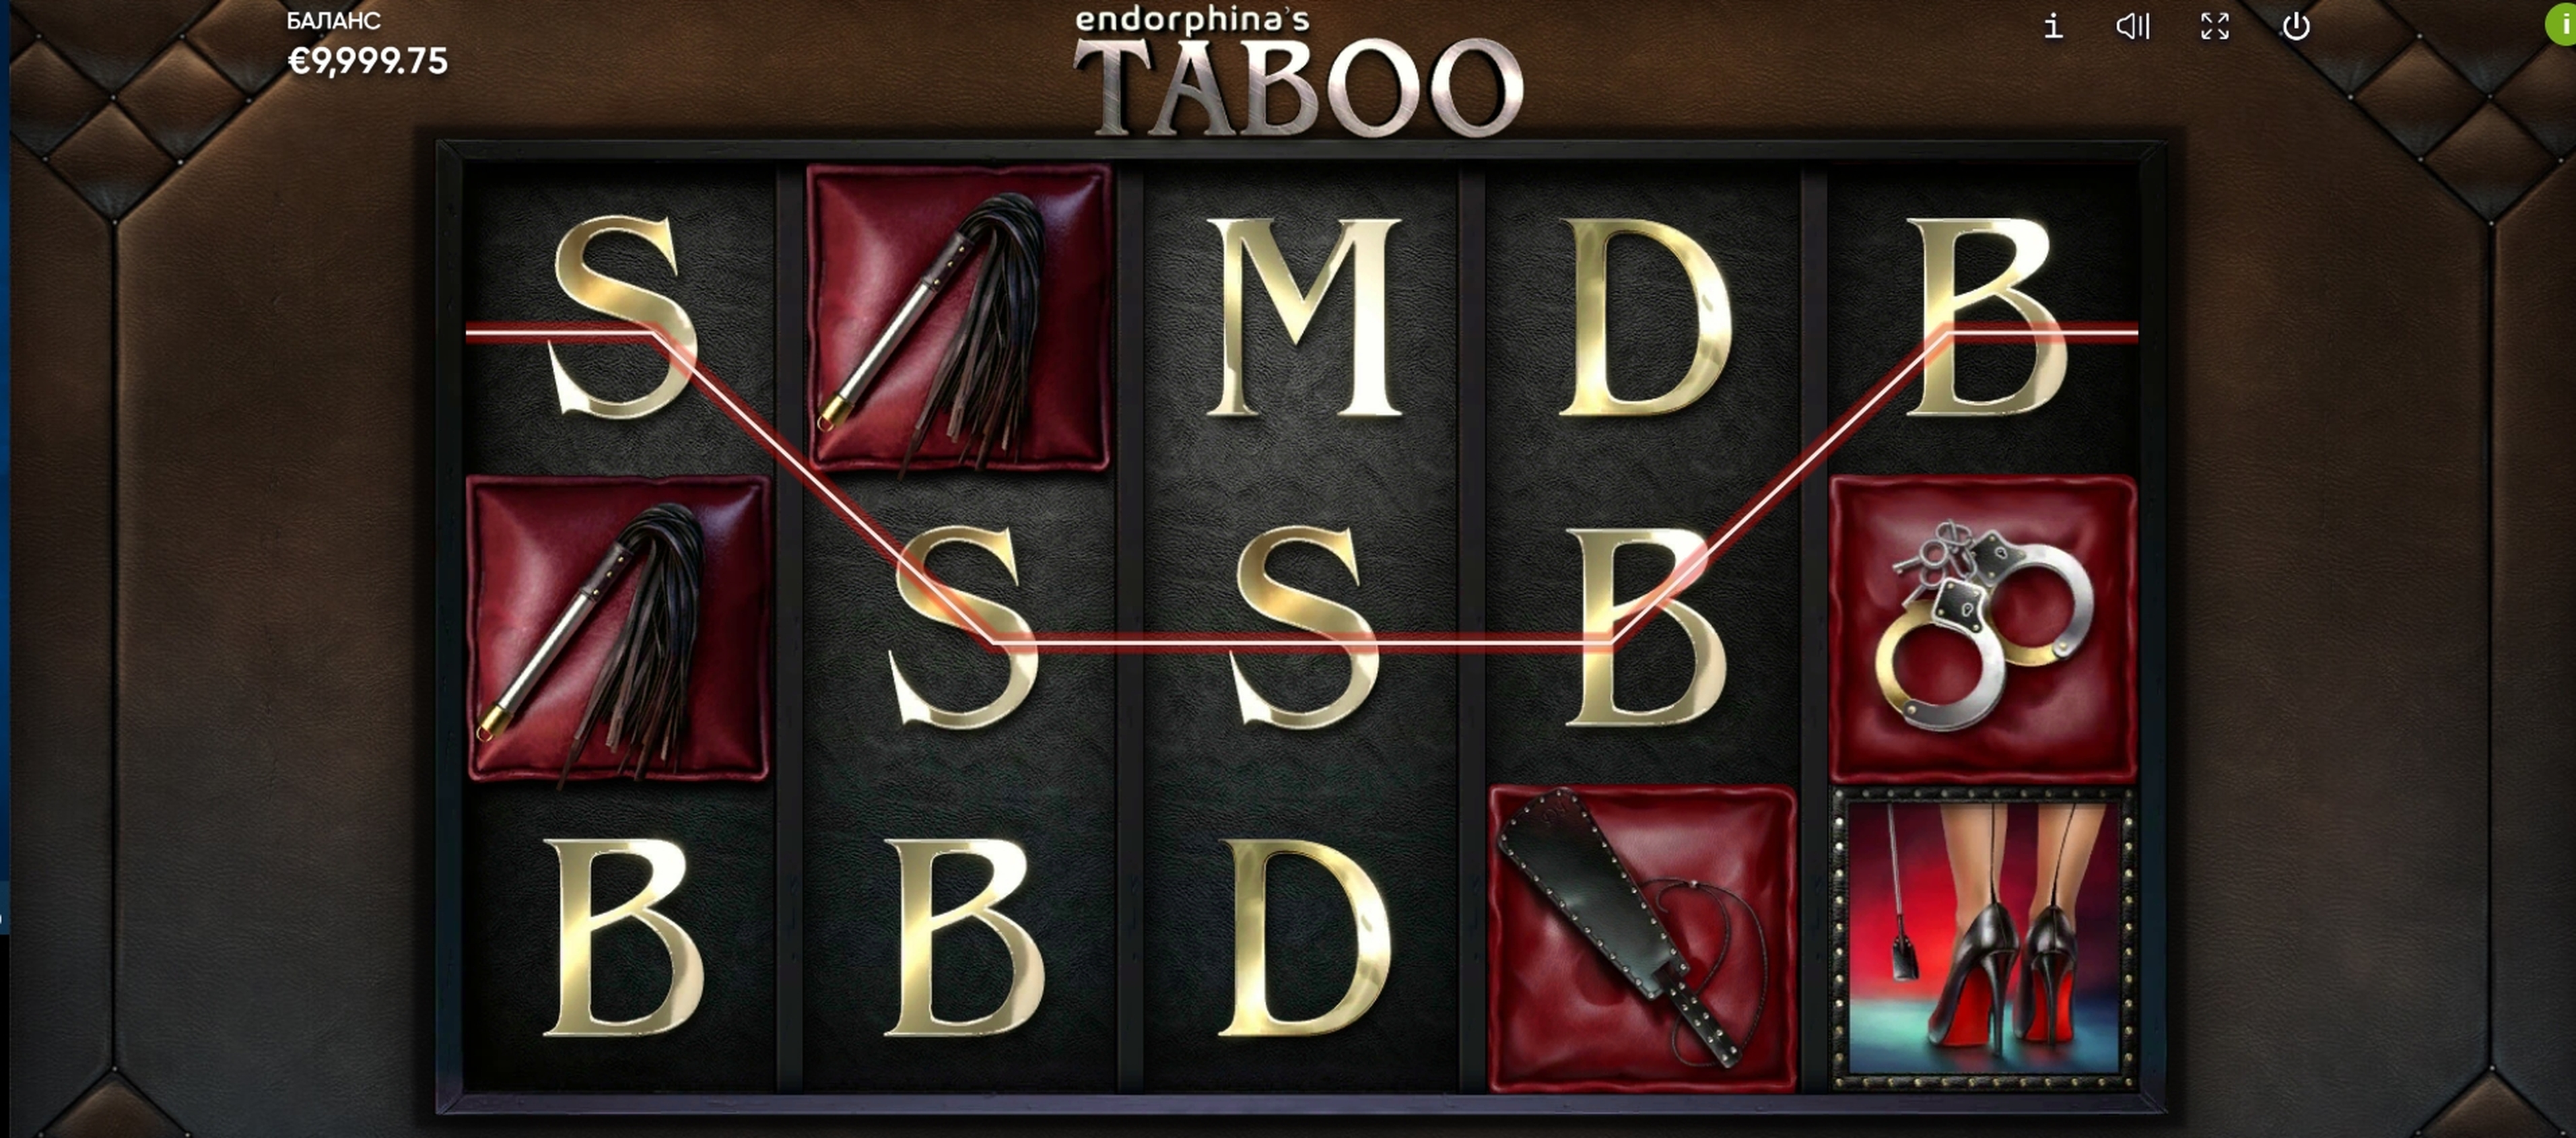 Win Money in Taboo Free Slot Game by Endorphina